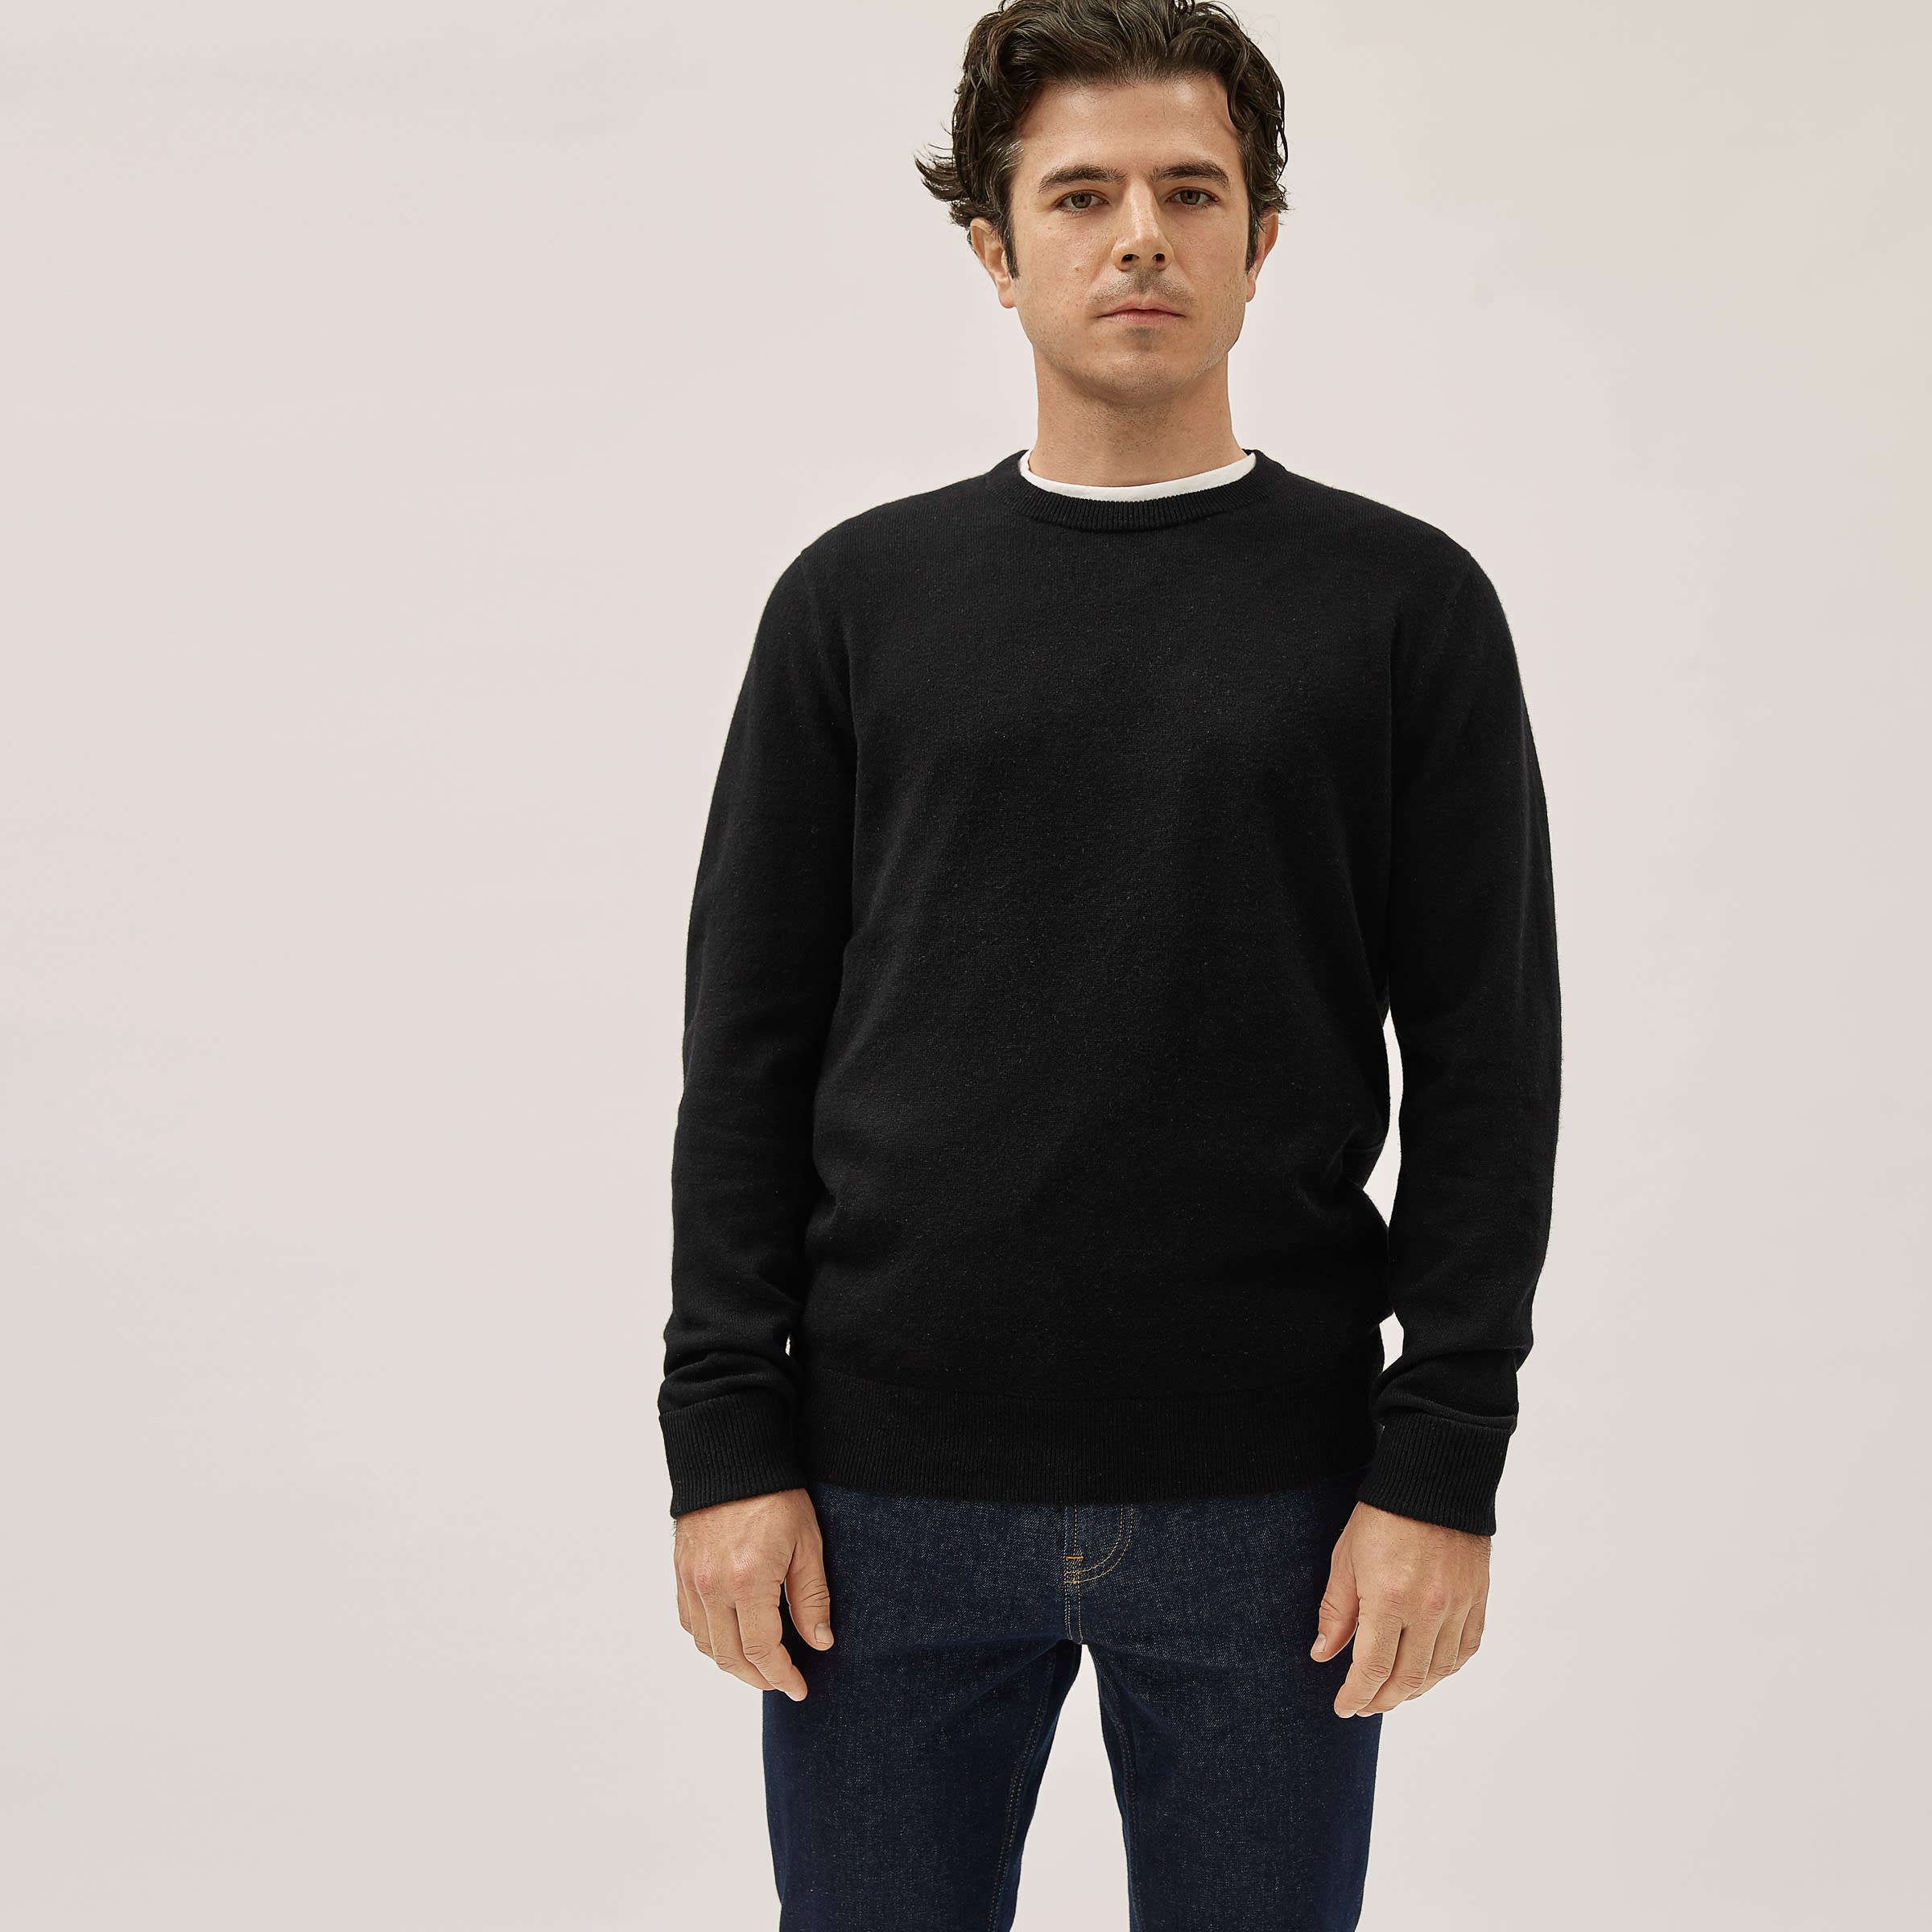 Everlane Men's Grade-a Cashmere Crew Neck Sweater in Black, Size Large